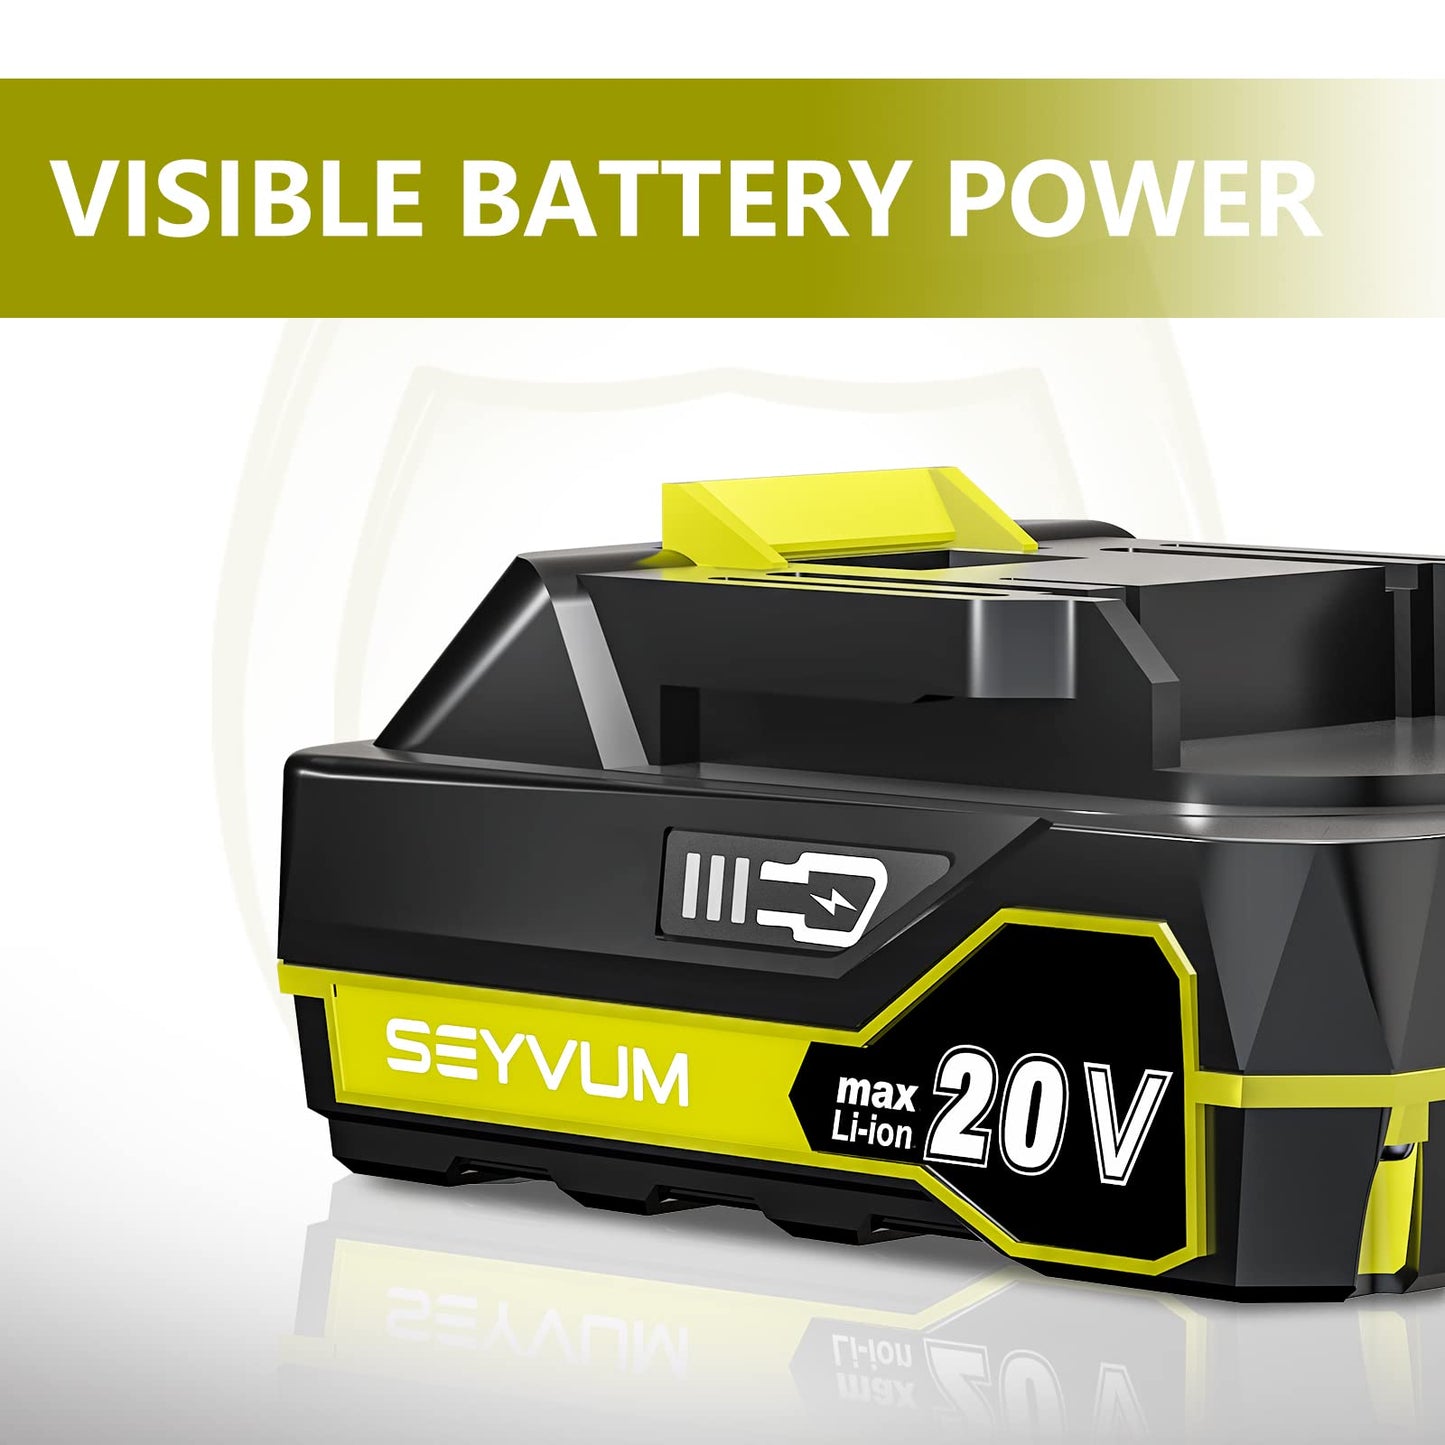 SEYVUM 20V MAX Battery, 2.0Ah Lithium Ion Battery，Compatible with DCBL2006 Leaf Blower Tools